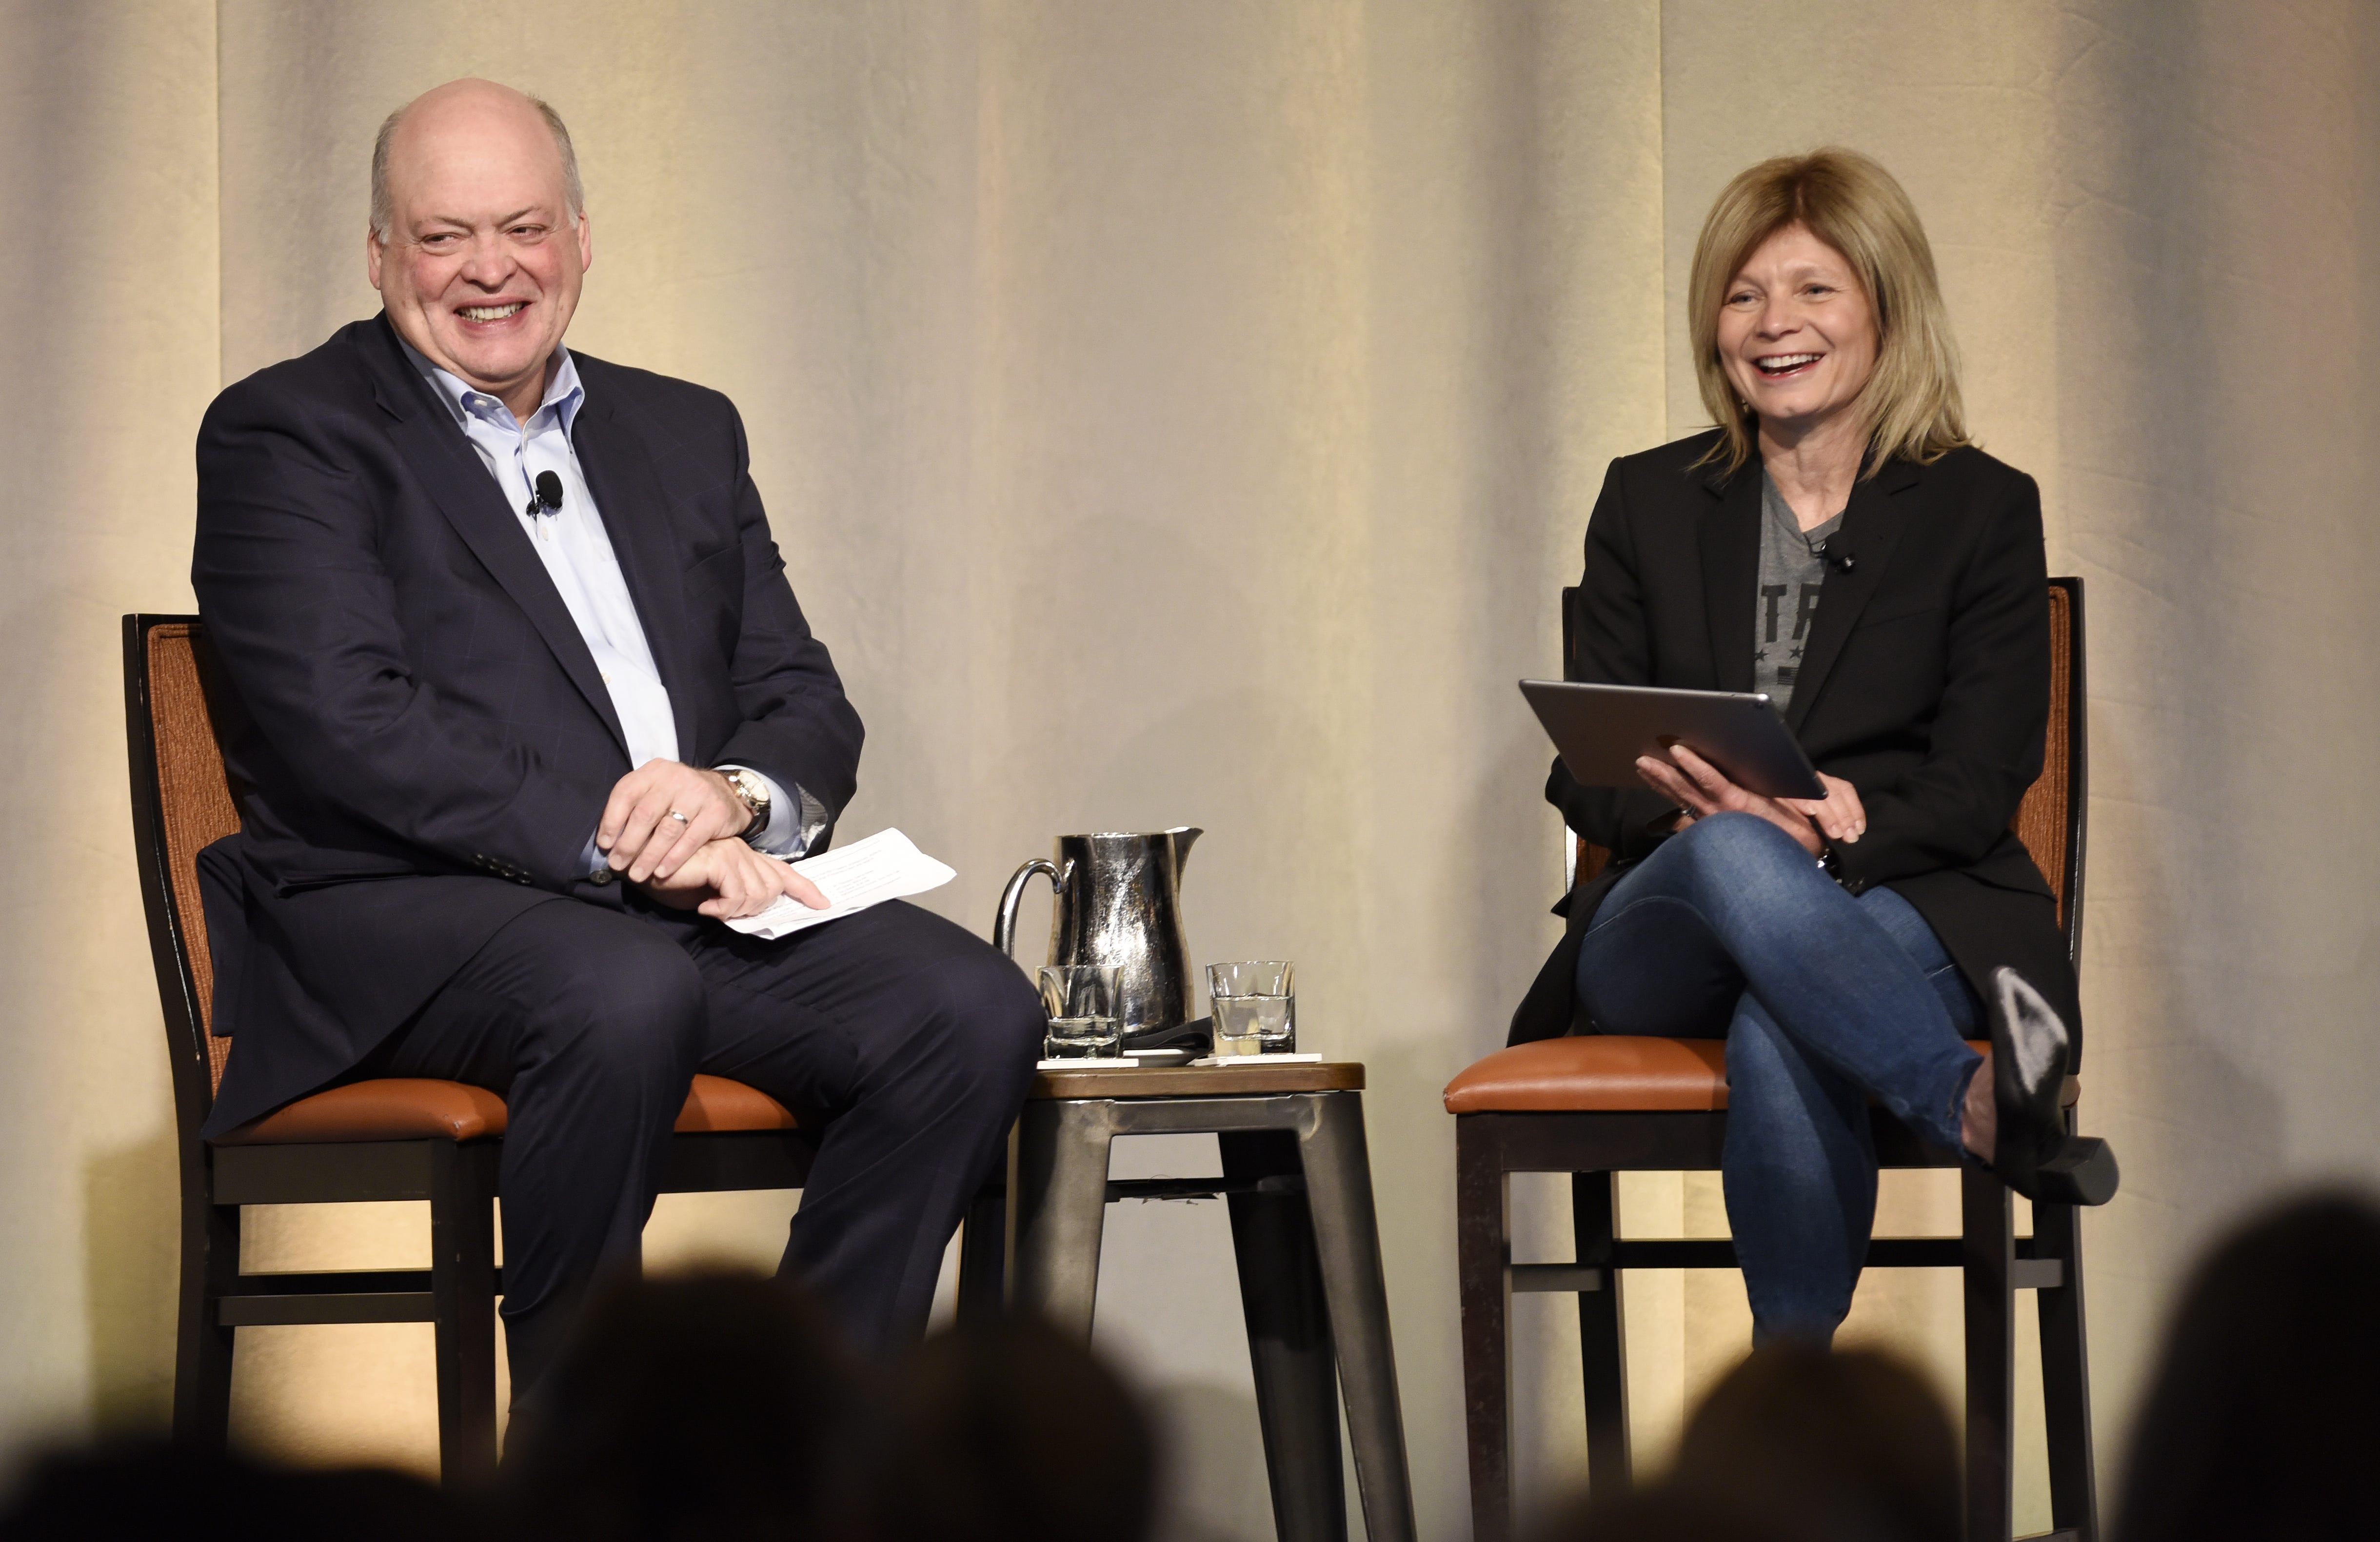 Ford's CEO Jim Hackett and President of Mobility Marcy Klevorn in 2017. Klevorn will retire, and Joe Hinrichs and Jim Farley assume new responsibilities to become the only two presidents at Ford, the automaker said Wednesday.